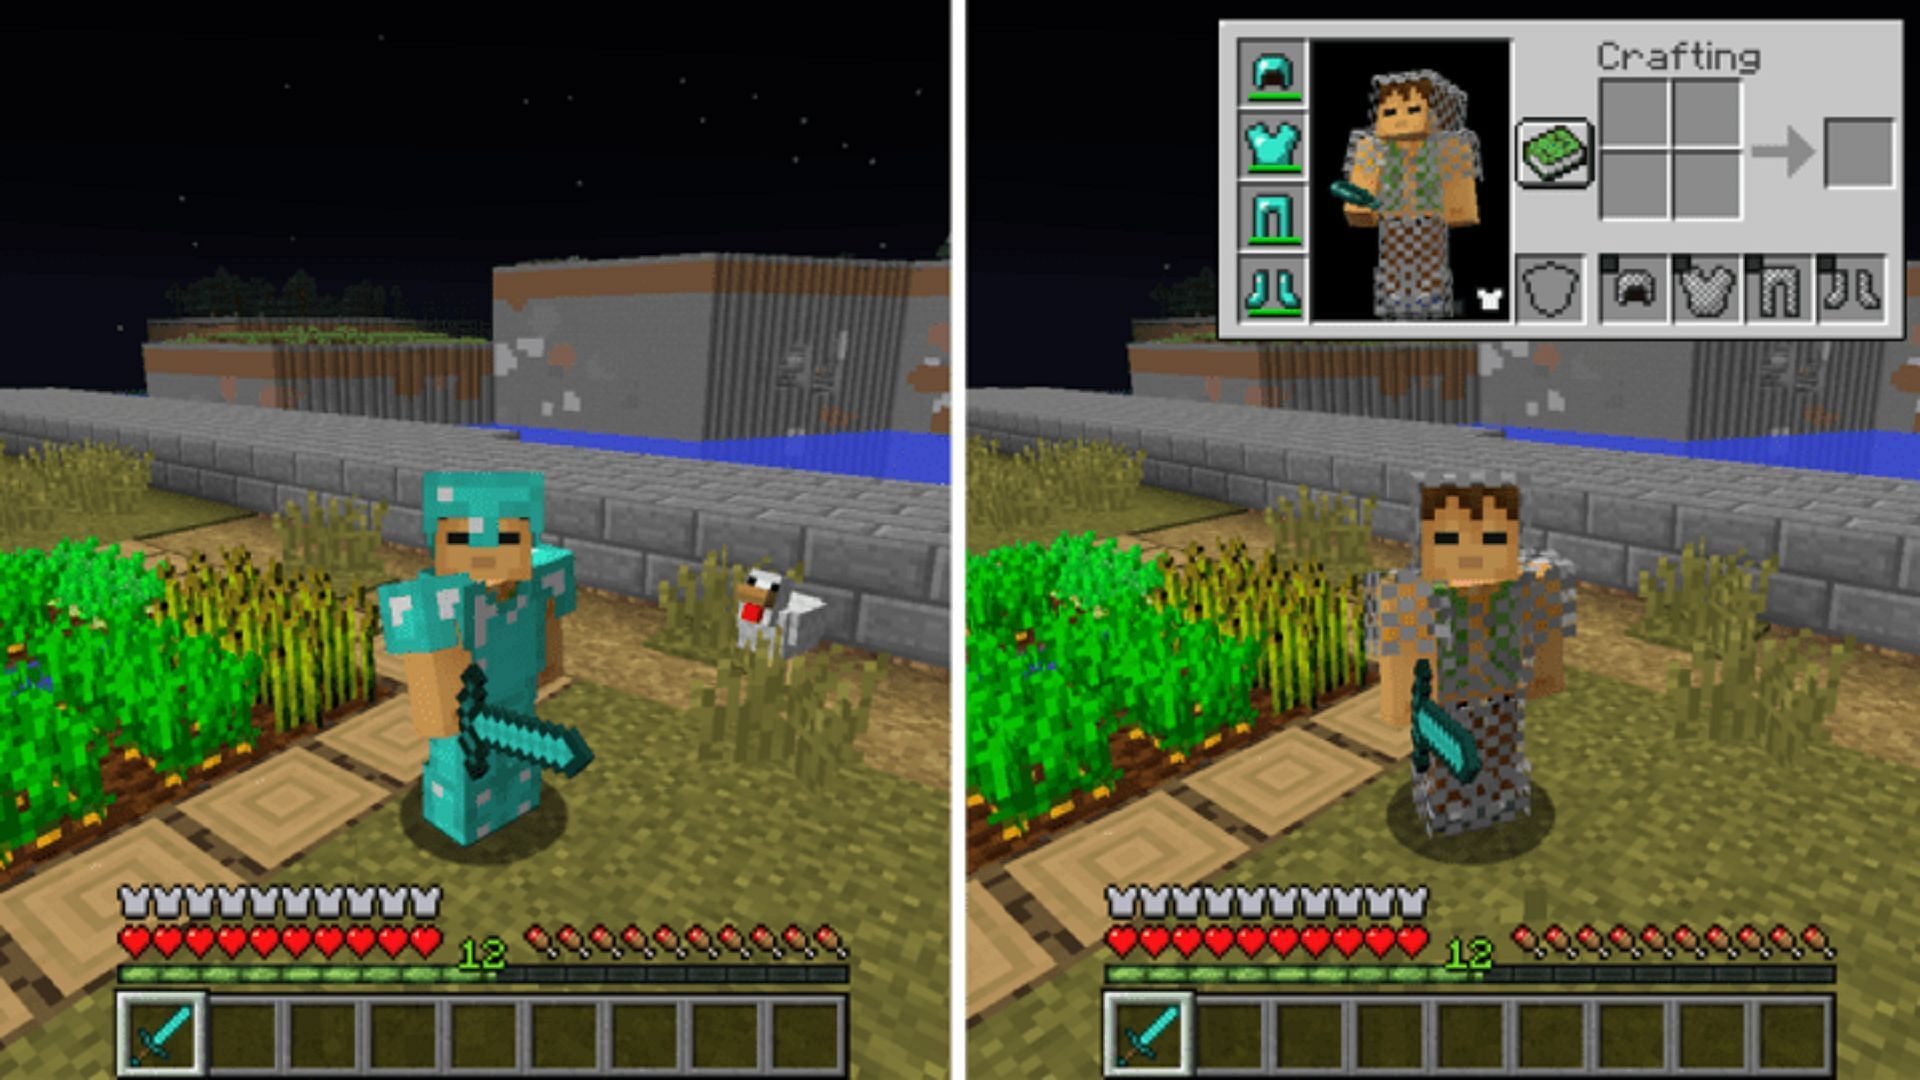 Cosmetic armor changes implemented in Minecraft by Cosmetic Armor Reworked (Image via LainMI/NewMinecraftMods)